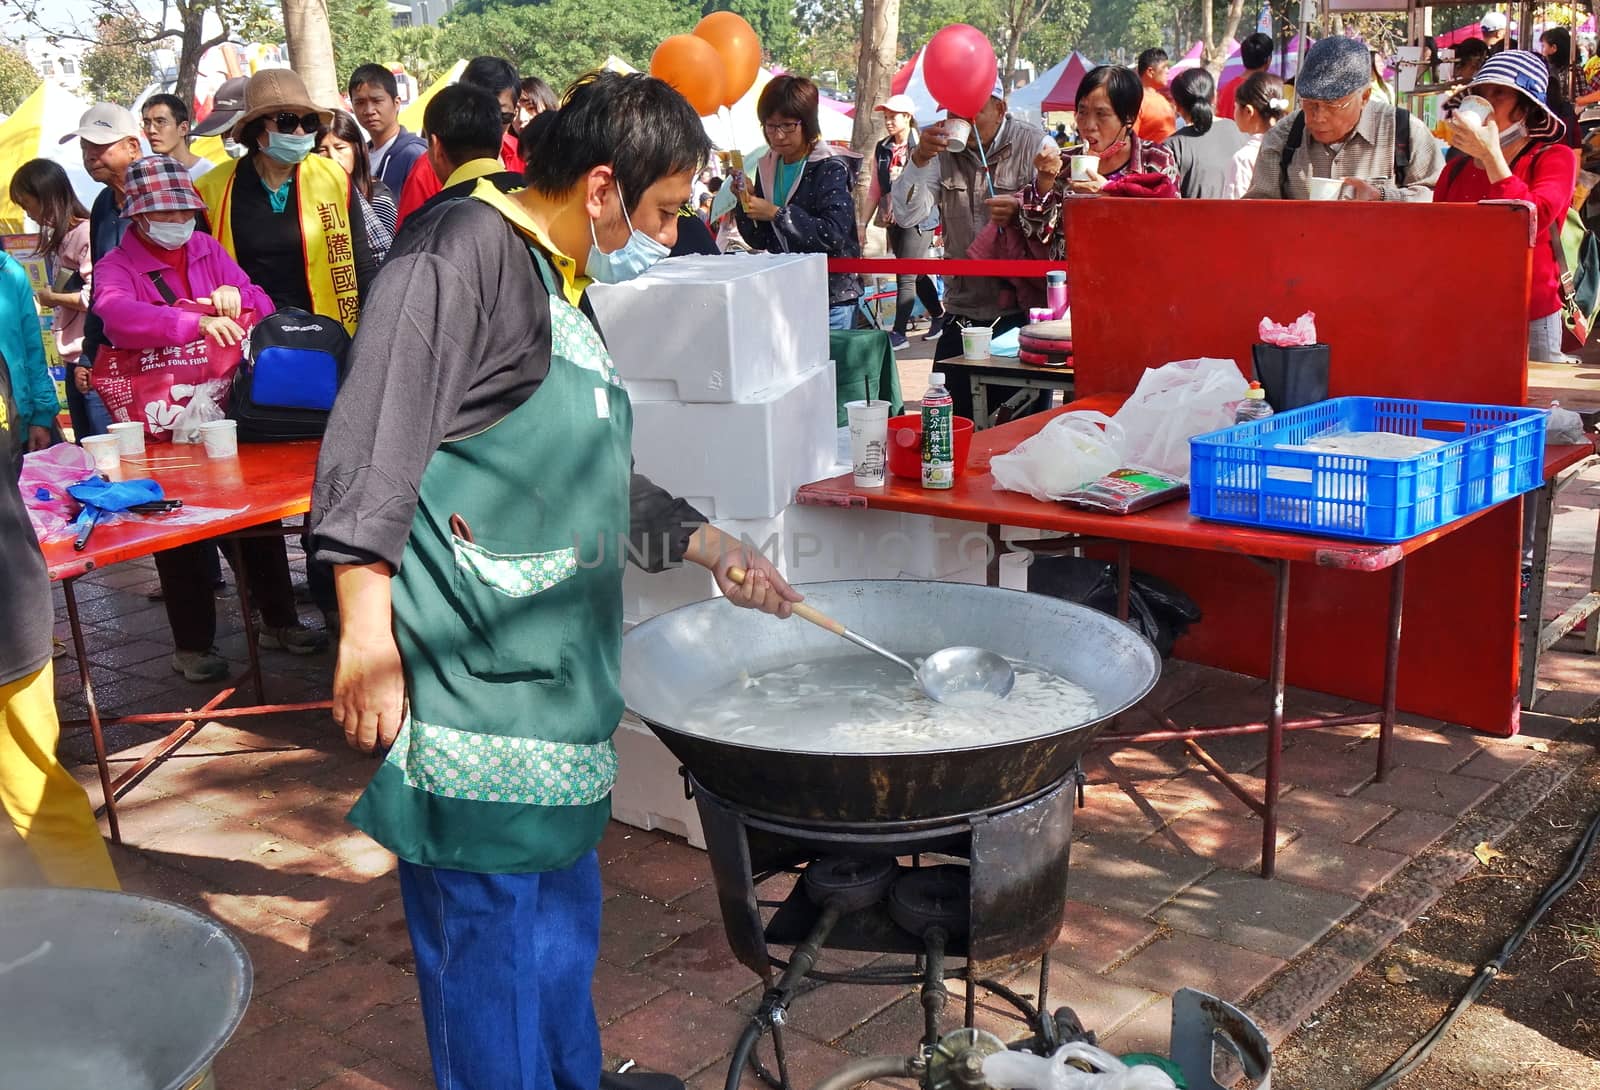 KAOHSIUNG, TAIWAN -- JANUARY 5, 2019: A man cooks fish soup in a large wok at the Luzhu Tomato Festival.
